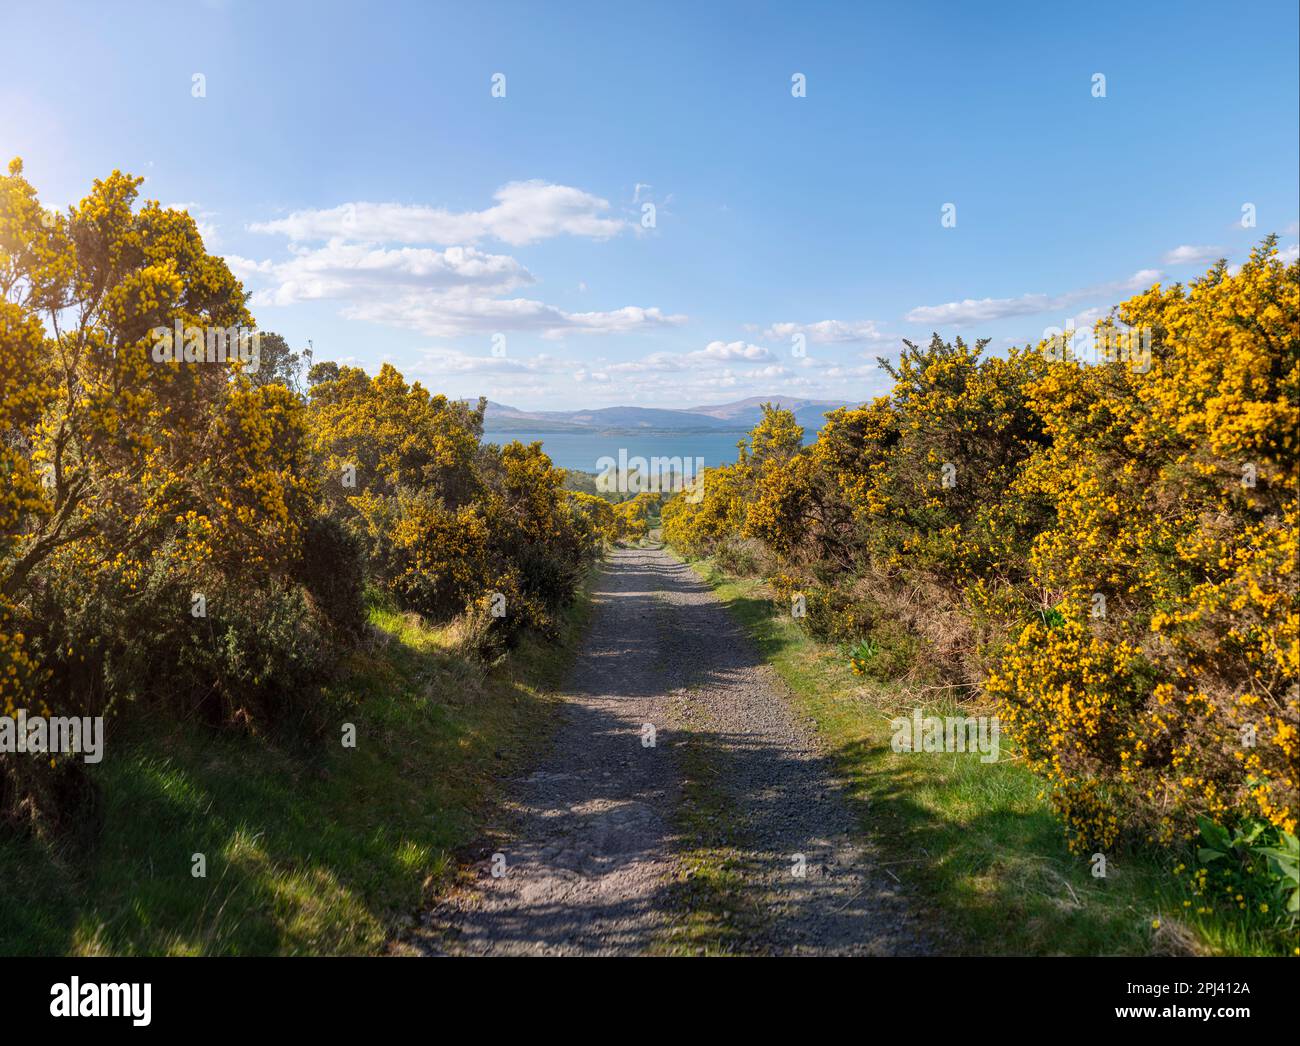 A country lane lined with bright yellow gorse bushes, on a walk in the landscape near Oban in Scotland. On a sunny day with bright blue skys Stock Photo